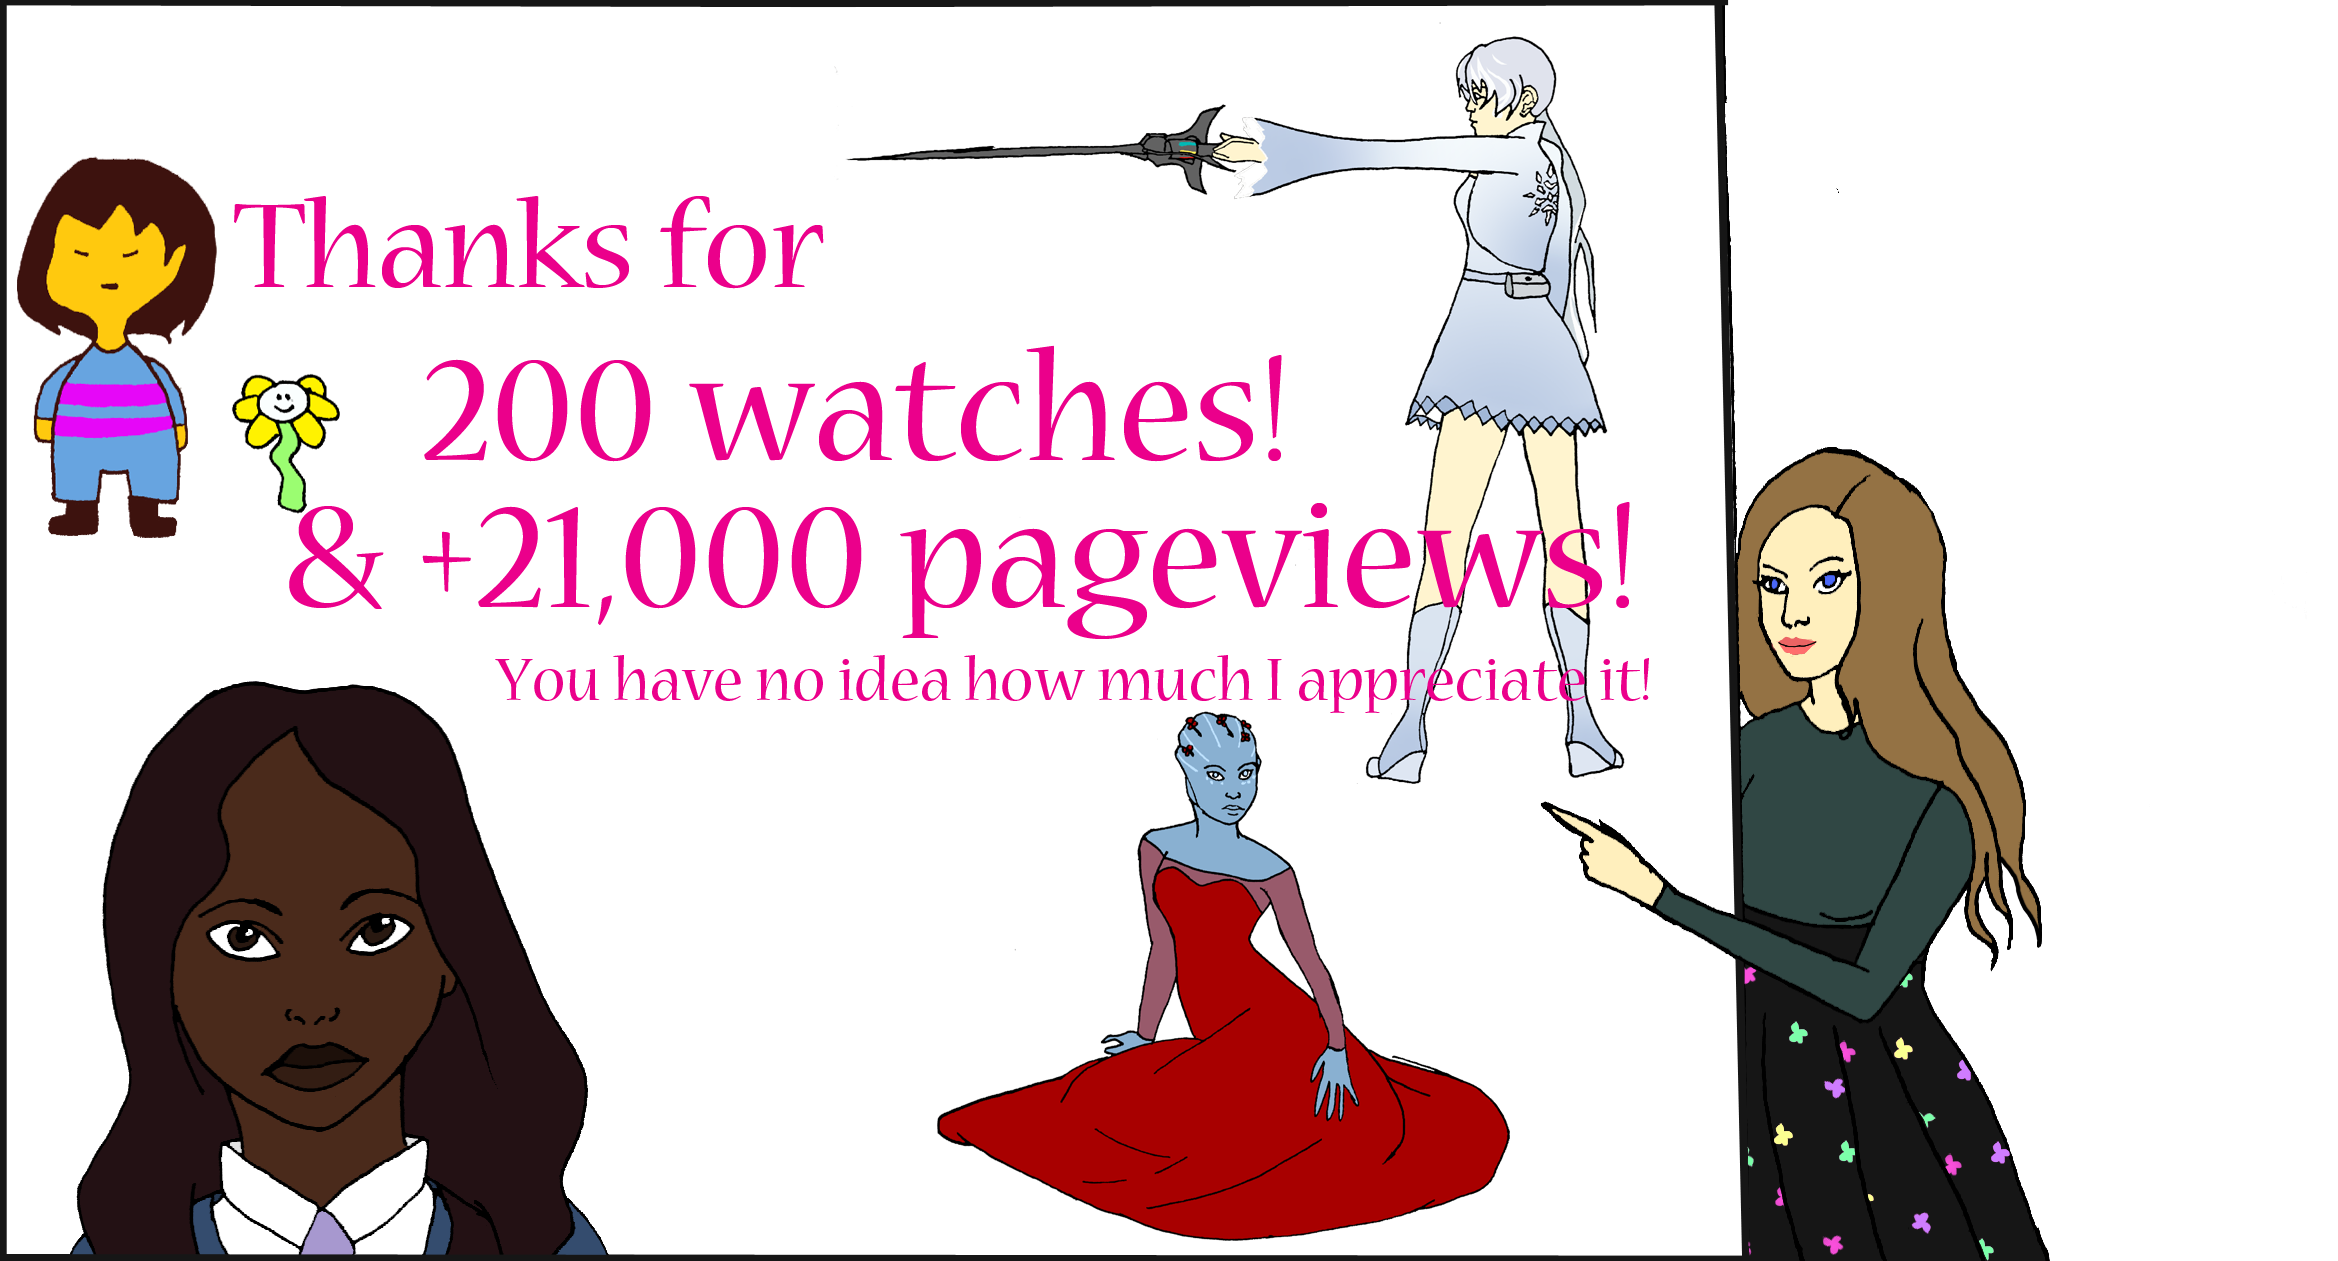 Thanks for 200 watches!